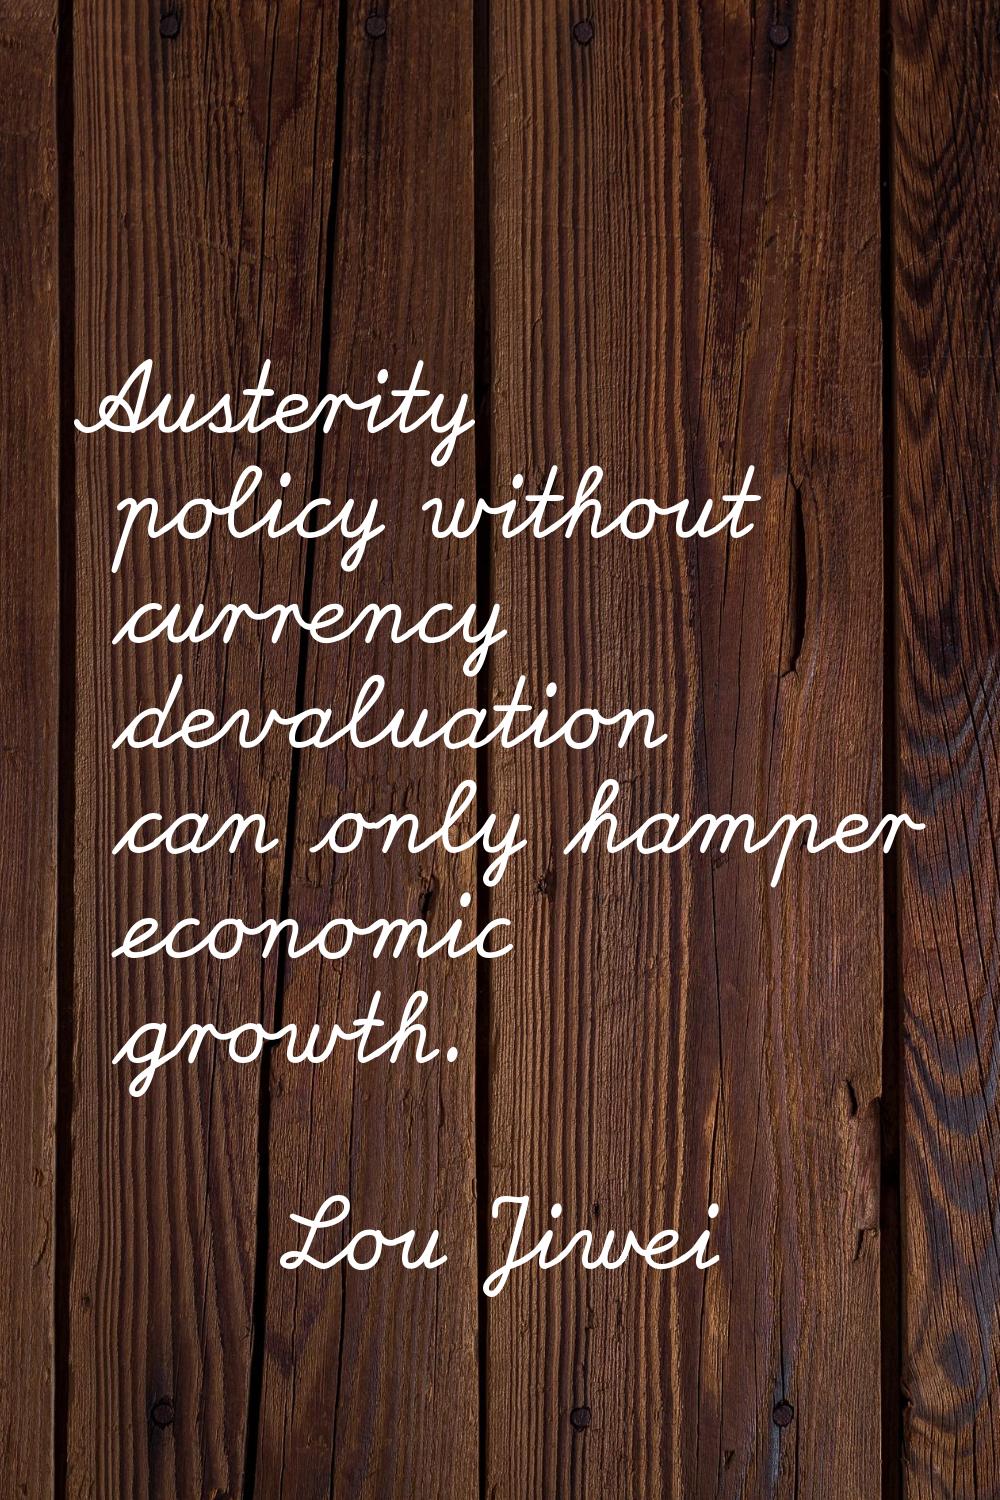 Austerity policy without currency devaluation can only hamper economic growth.